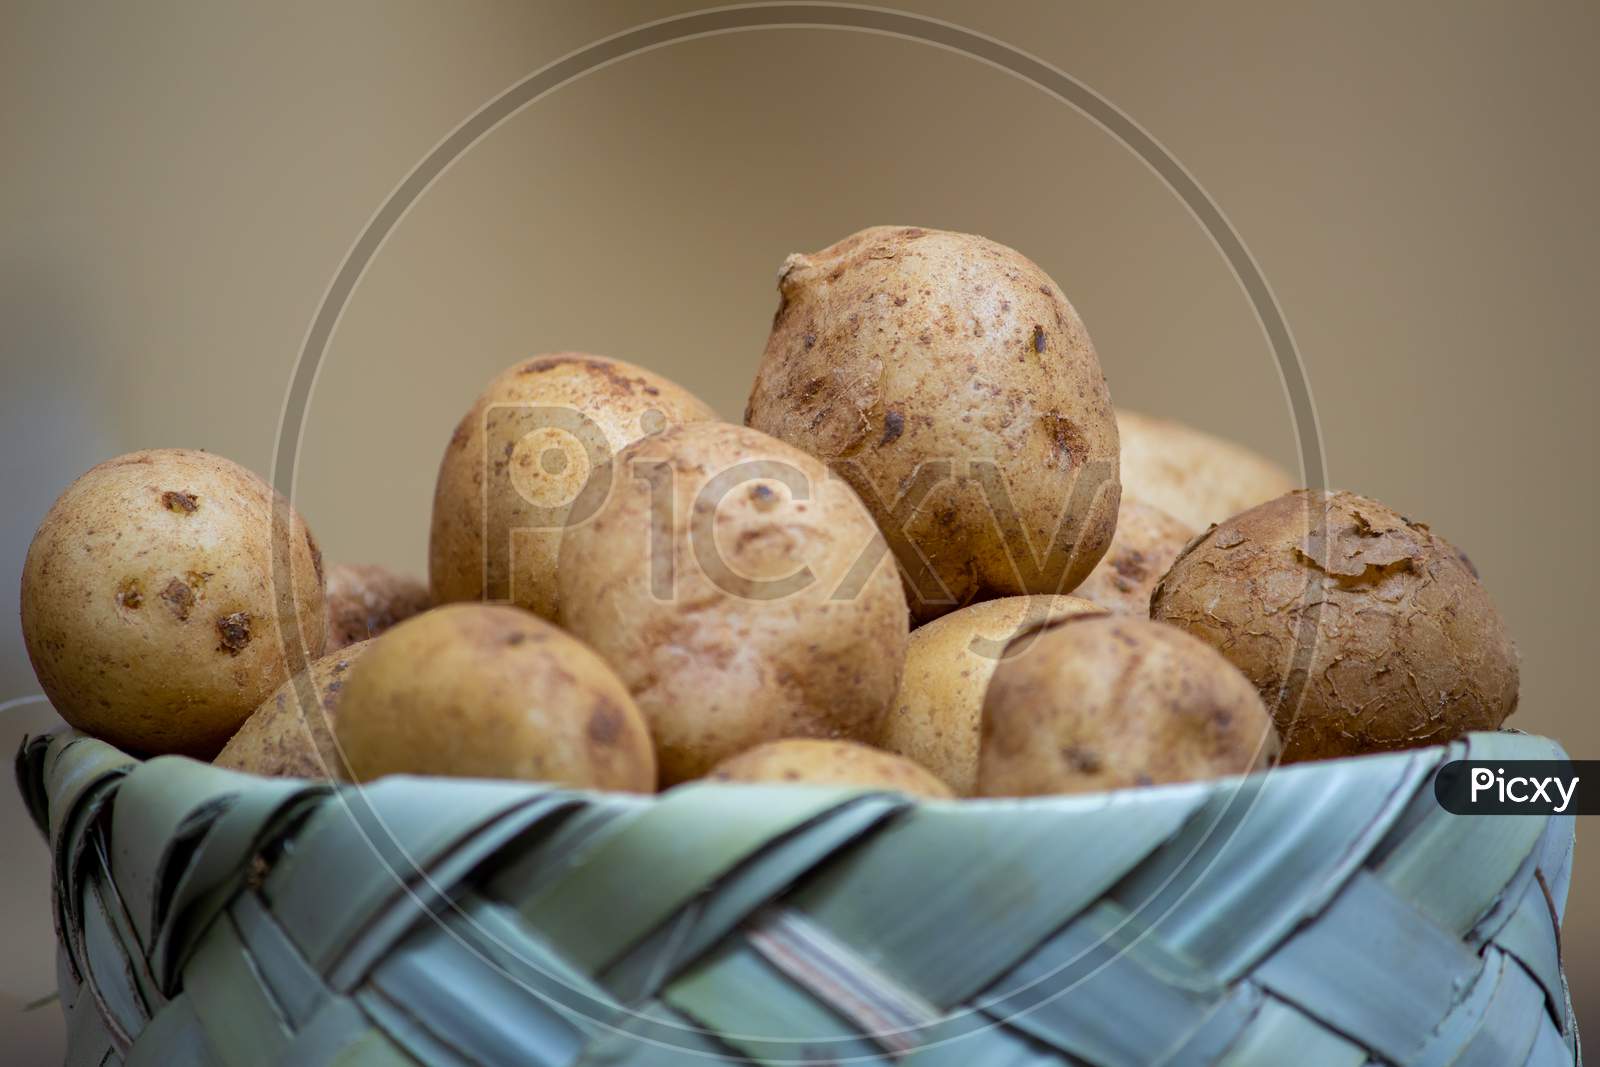 View Of Small Round Potatoes In A Basket. Market Stall Selling Small Potatoes.